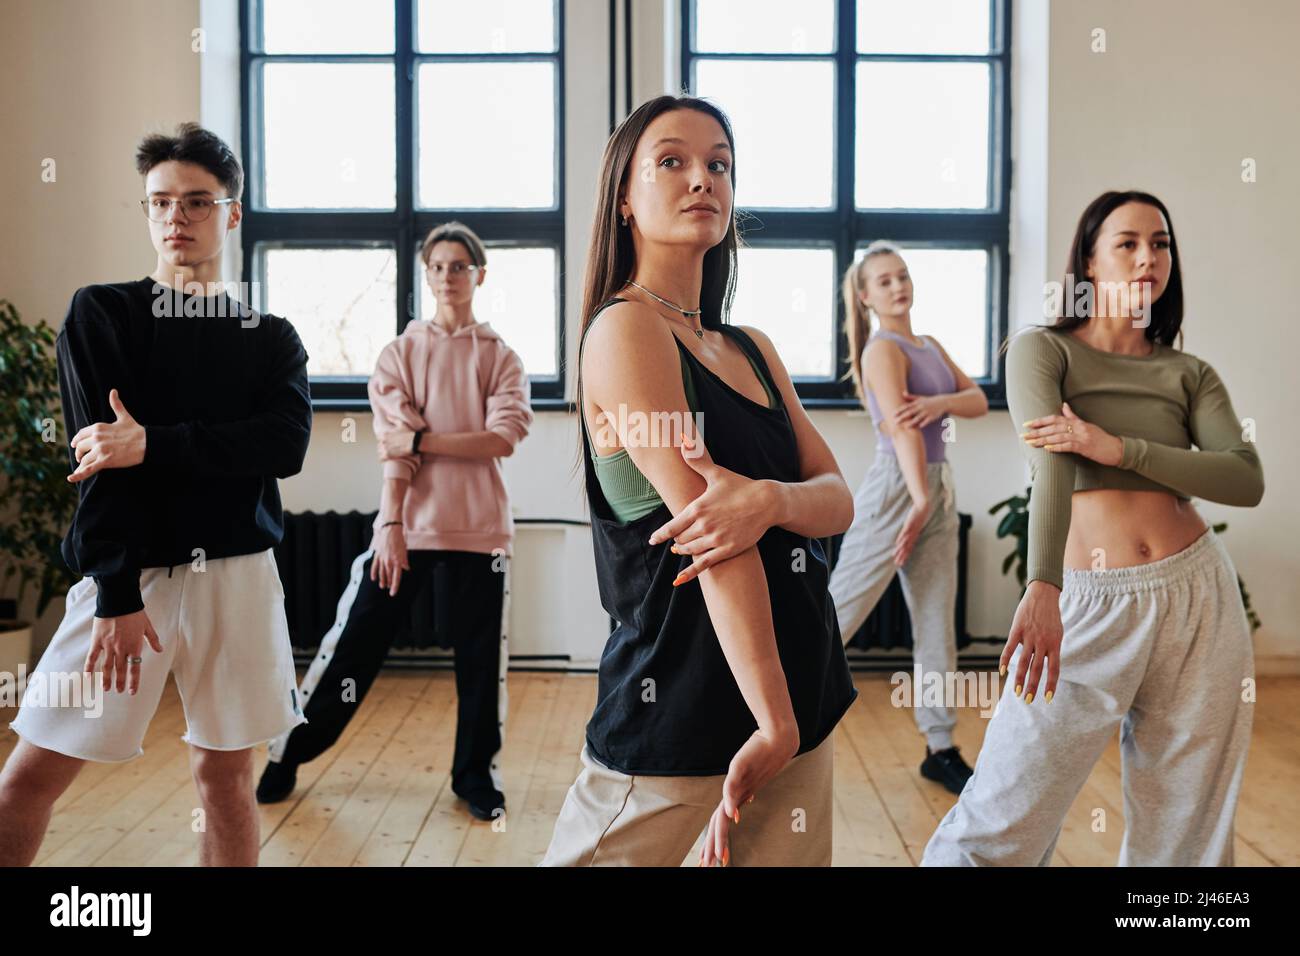 Group of contemporary teens in pants and tanktops repeating after dance instructor while learning new movements of vogue dancing Stock Photo